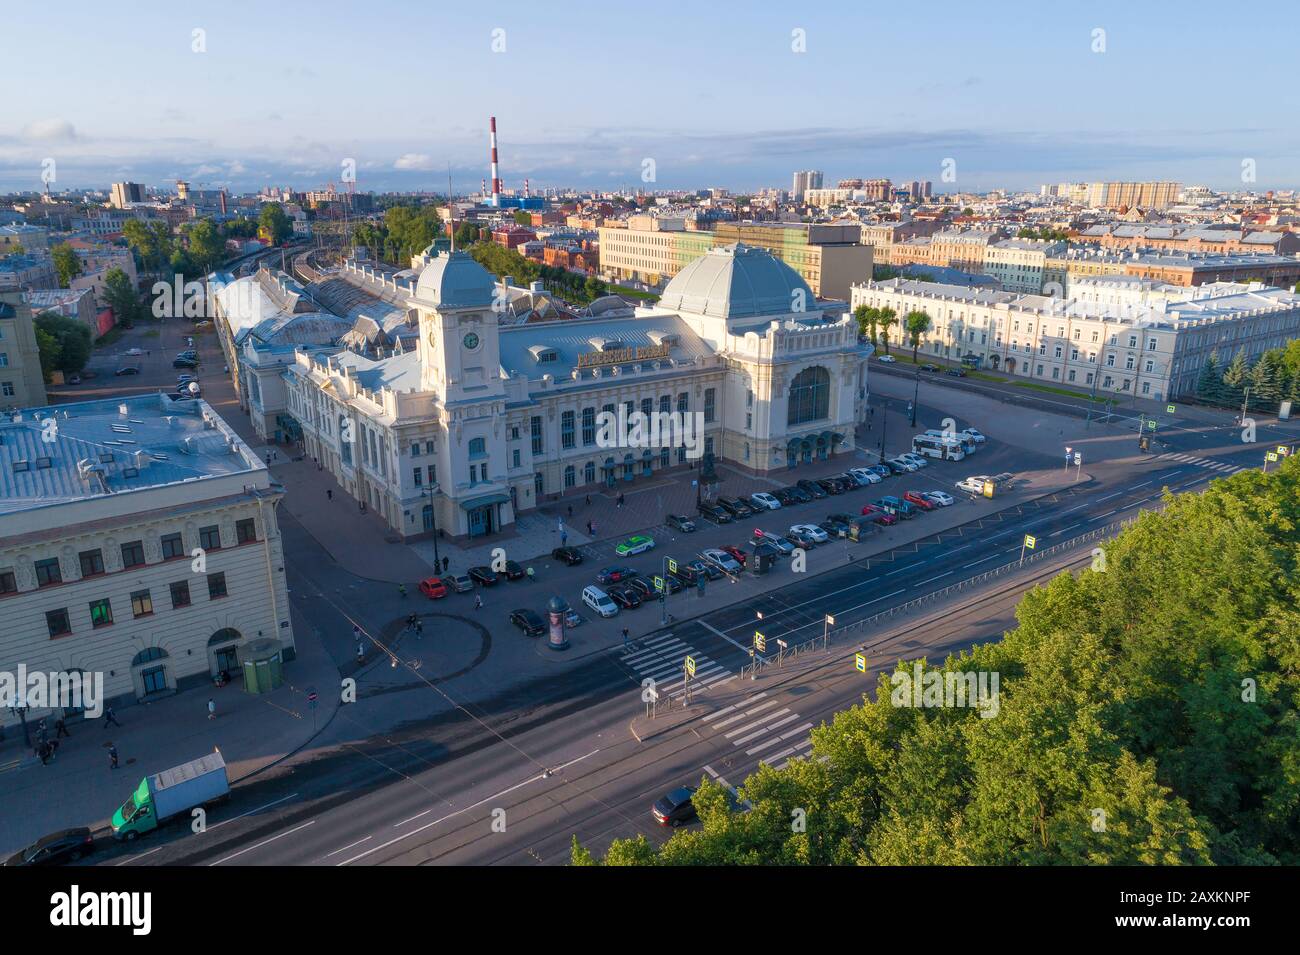 ST. PETERSBURG, RUSSIA - JULY 25, 2019: Aerial view of the old building of the Vitebsk railway station on a sunny July morning (aerial photography) Stock Photo